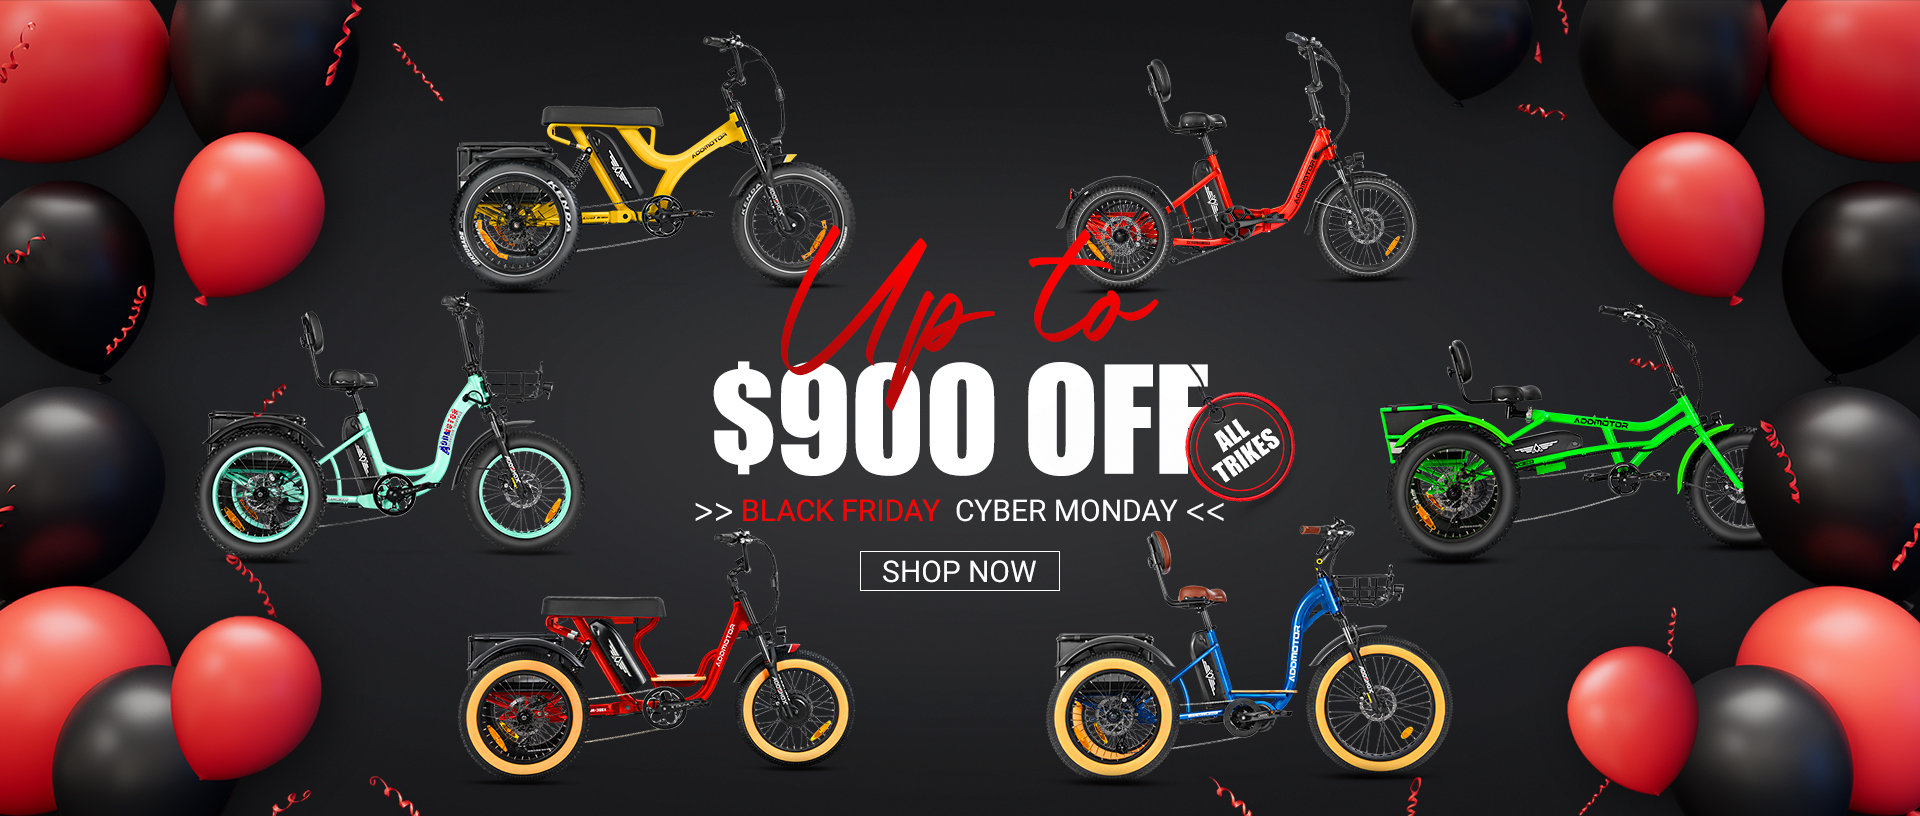 up to $900 off black friday for all etrikes